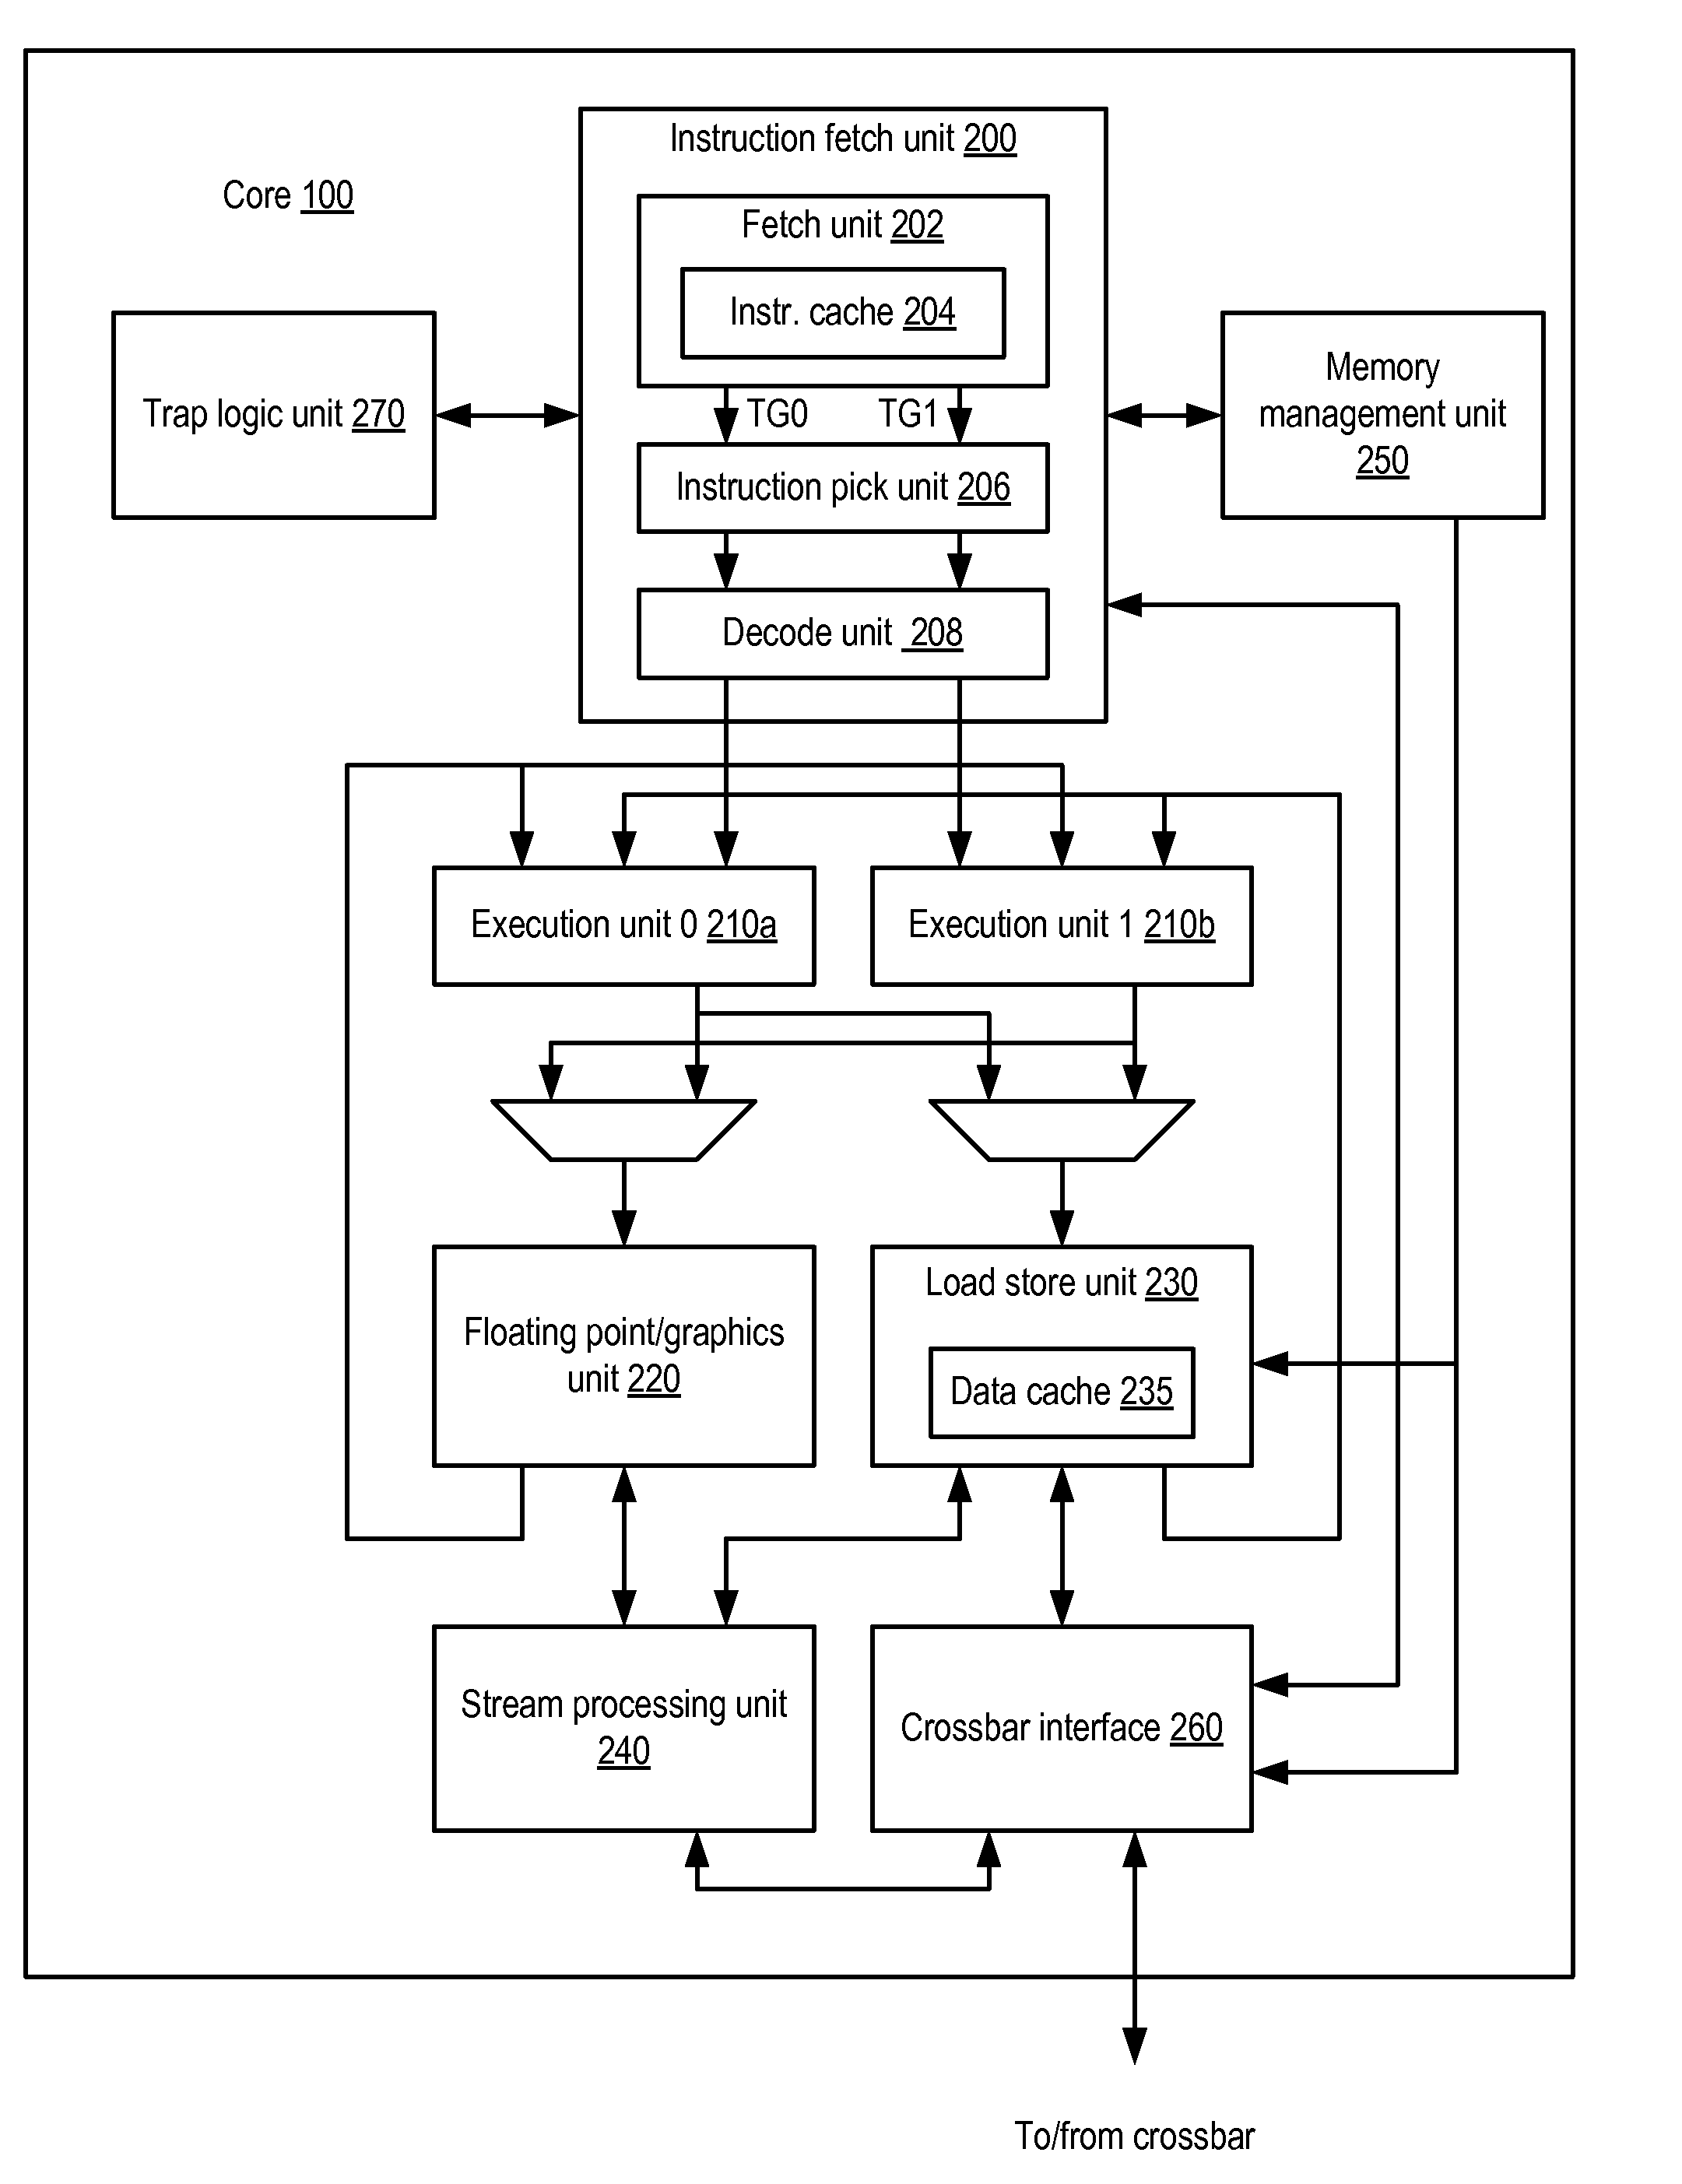 Reducing implementation costs of communicating cache invalidation information in a multicore processor